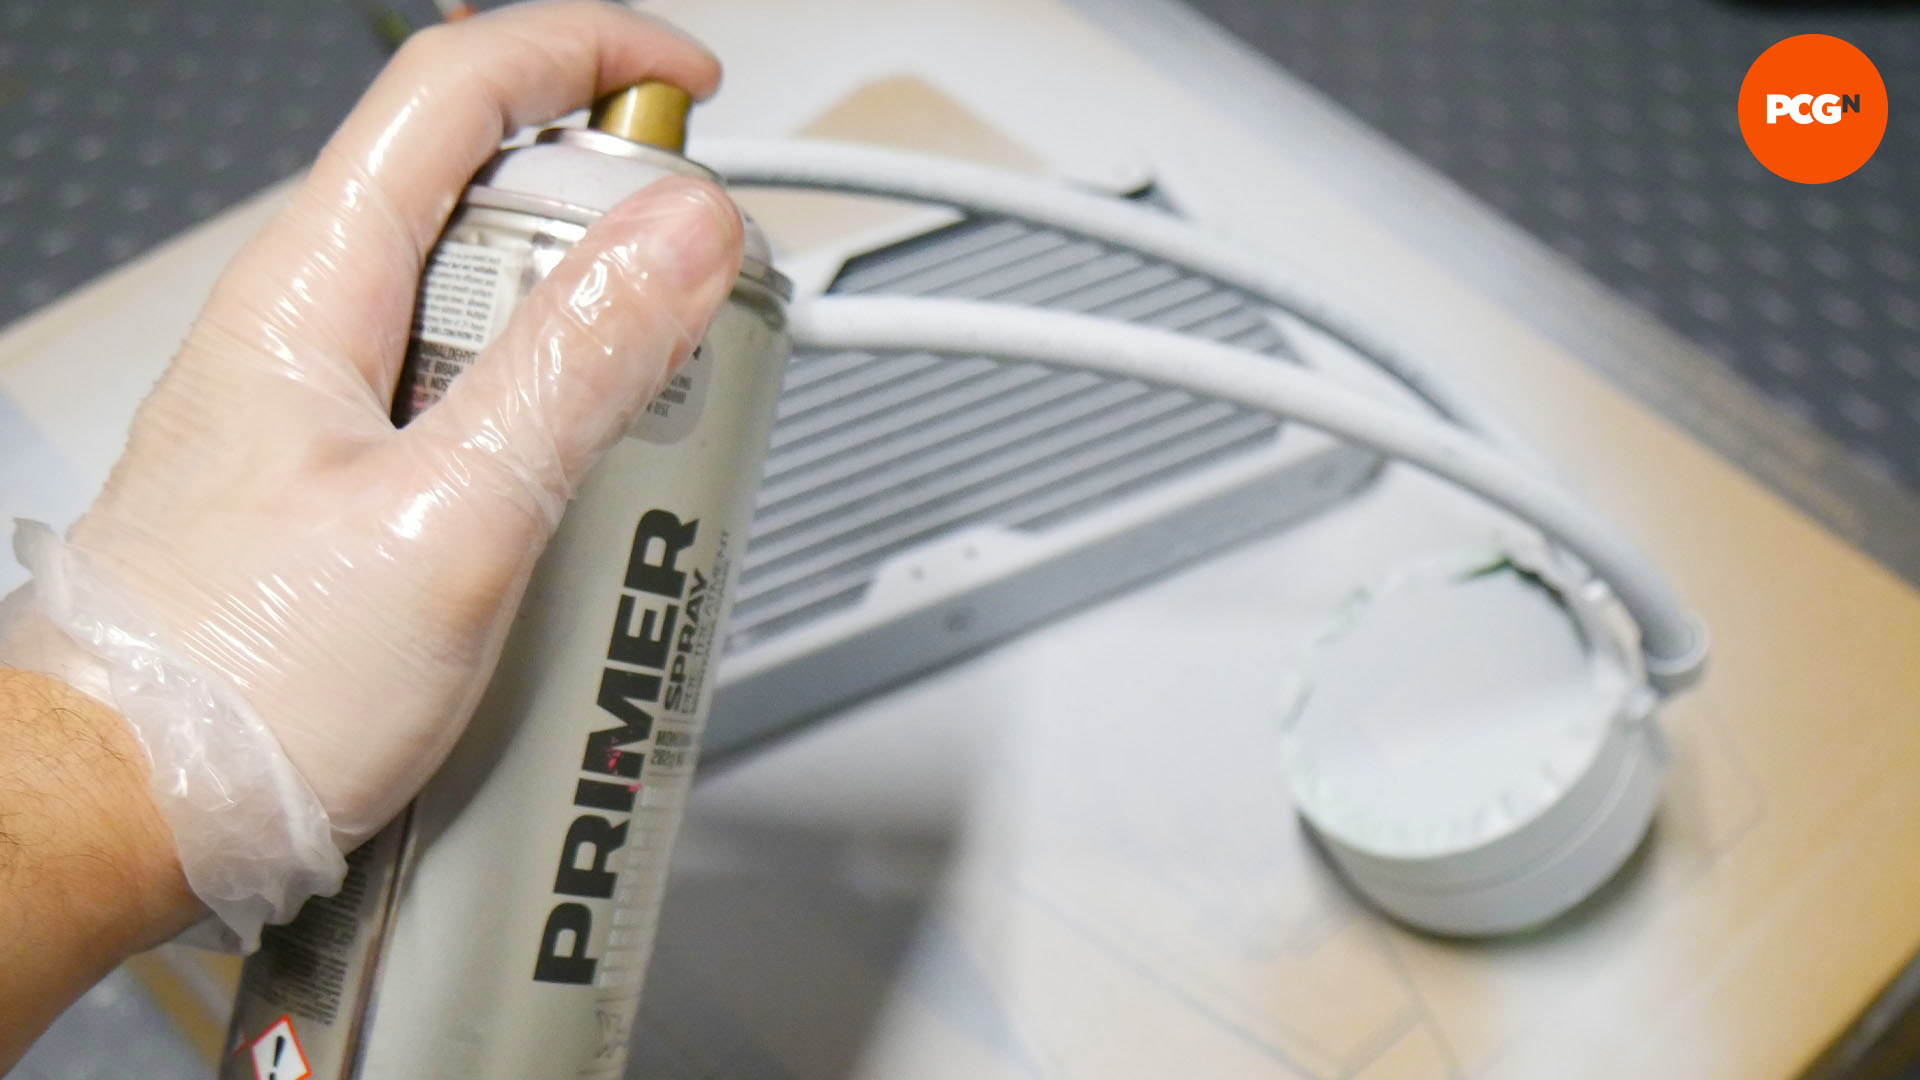 How to paint AIO cooler: Spray primer